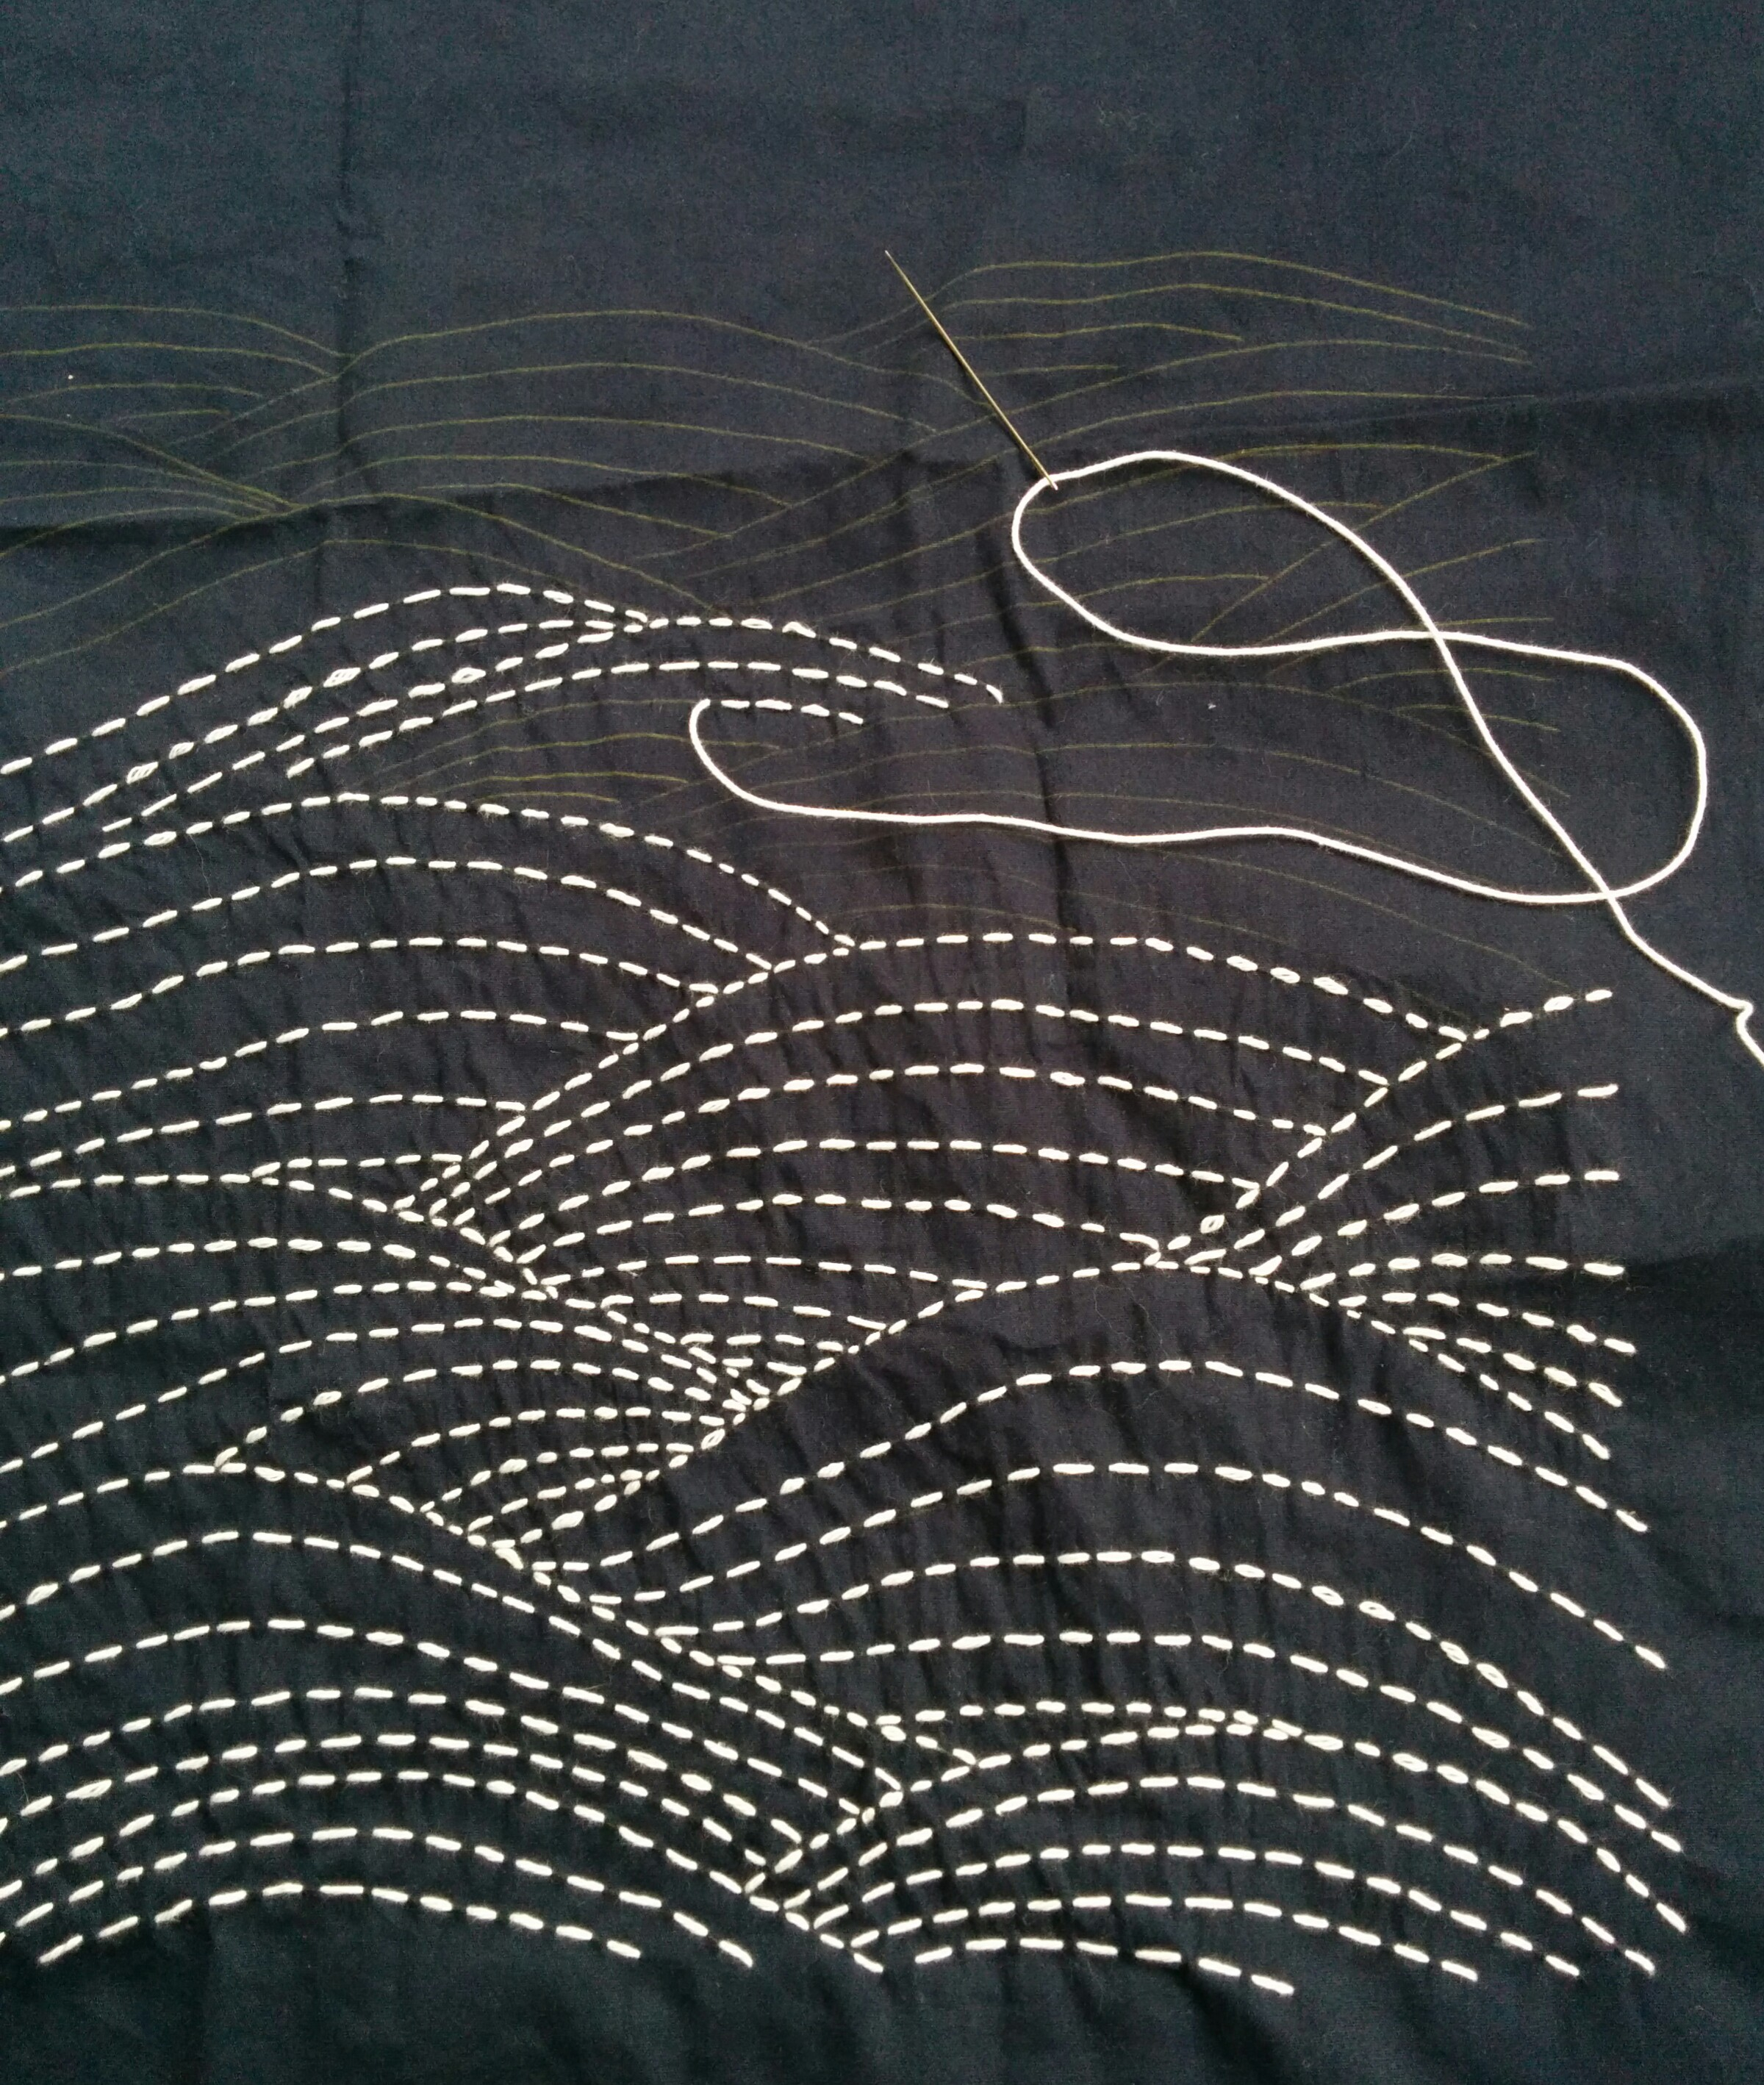 Japanese Embroidery Patterns Free Fully Booked Japanese Sashiko Embroidery Workshop Sunday August 25th 1000 1600